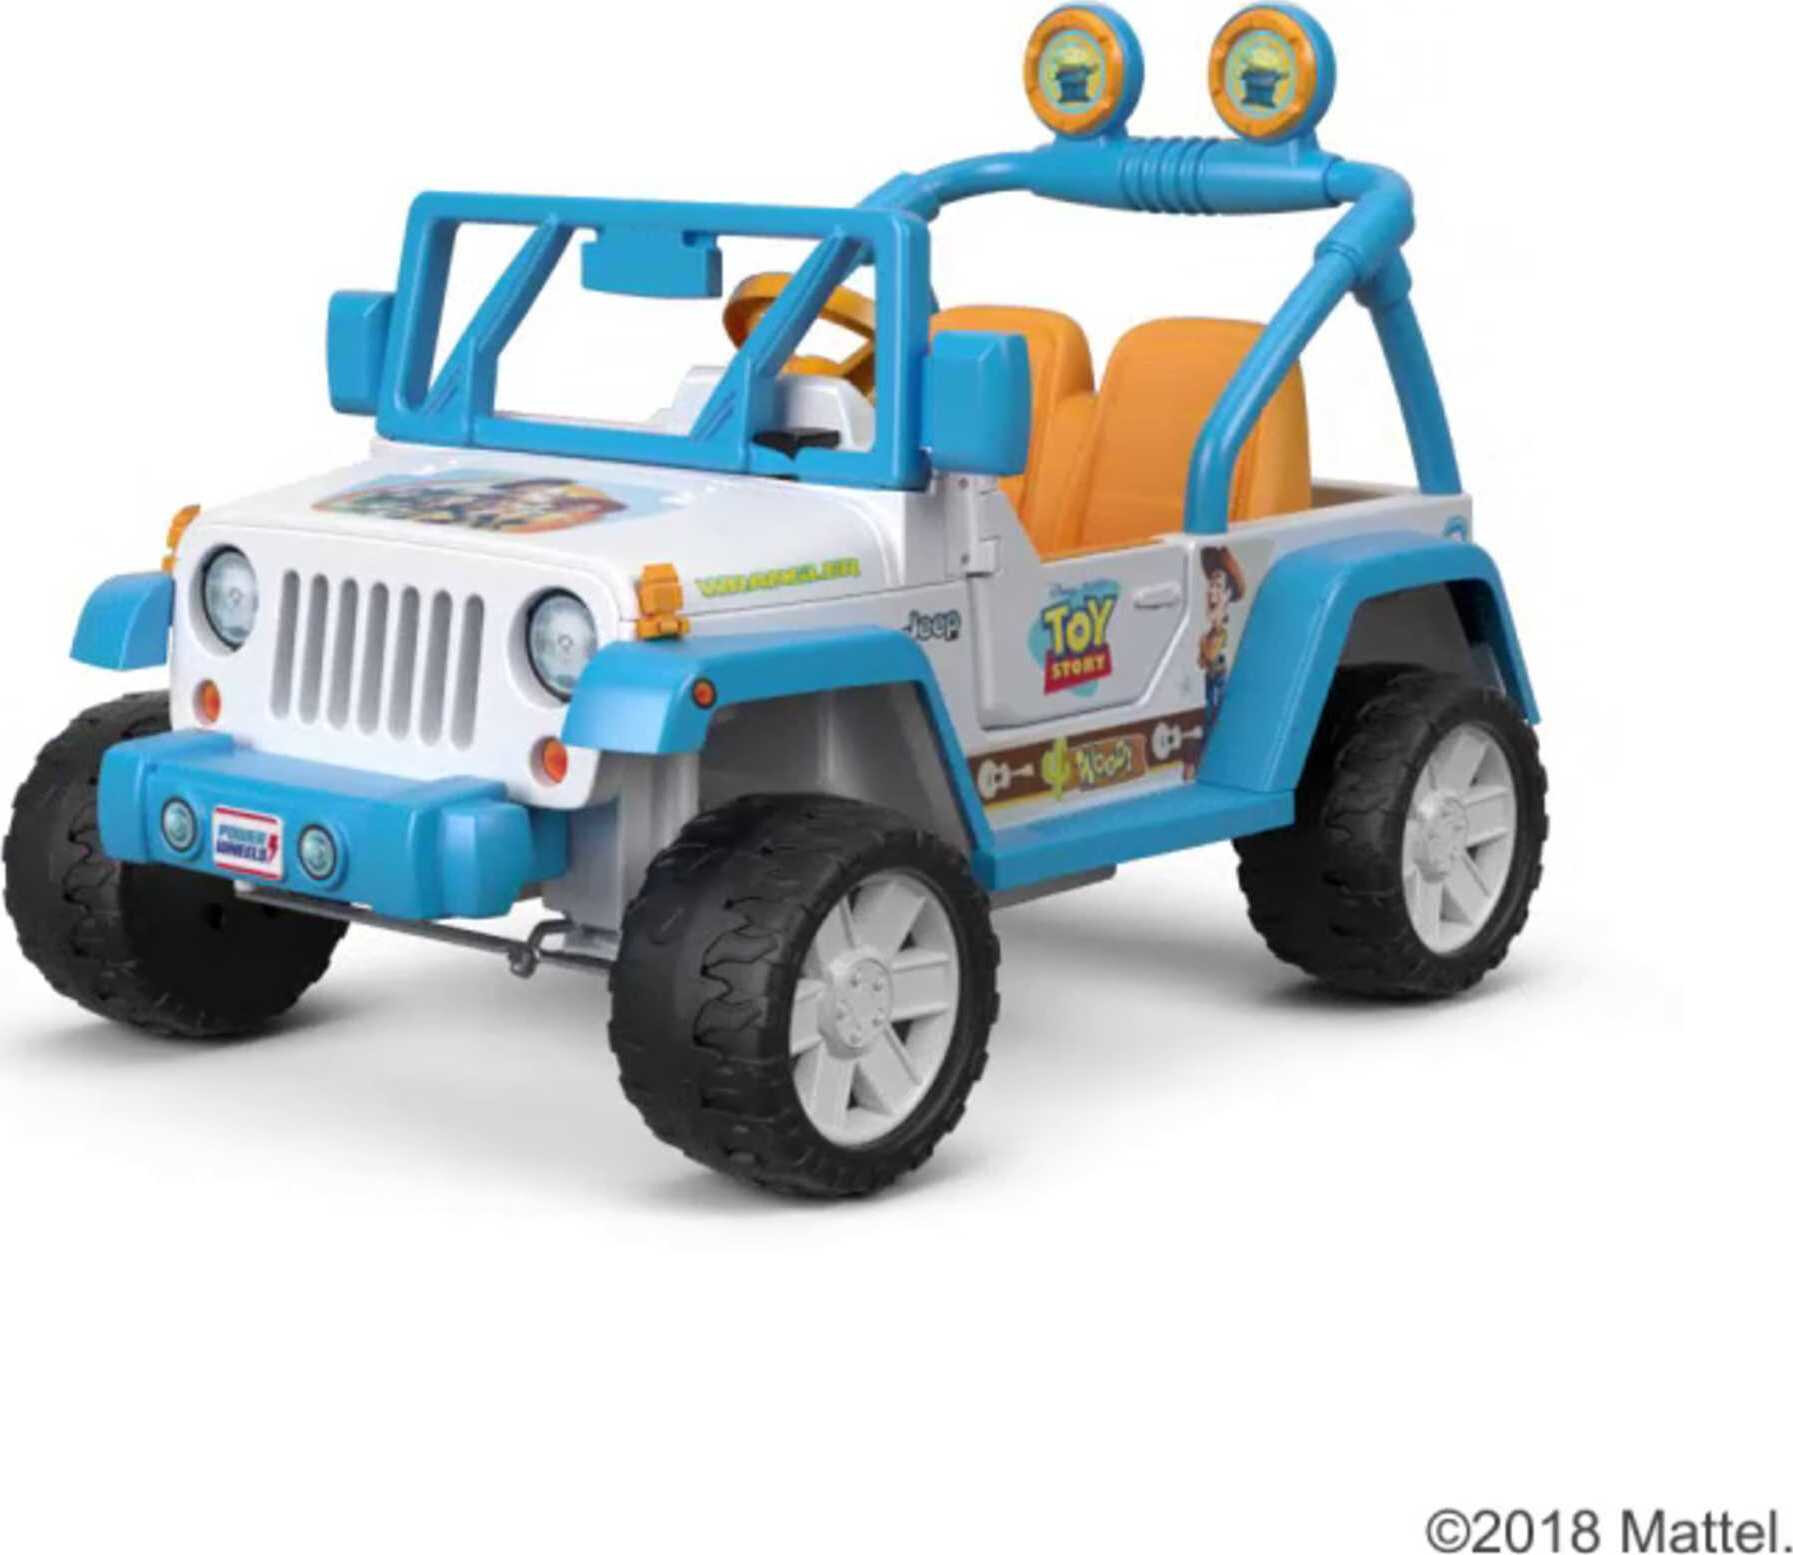 Power Wheels Disney Pixar Toy Story Jeep Wrangler Battery Powered Ride-On Vehicle with Sounds, 12V - image 1 of 8